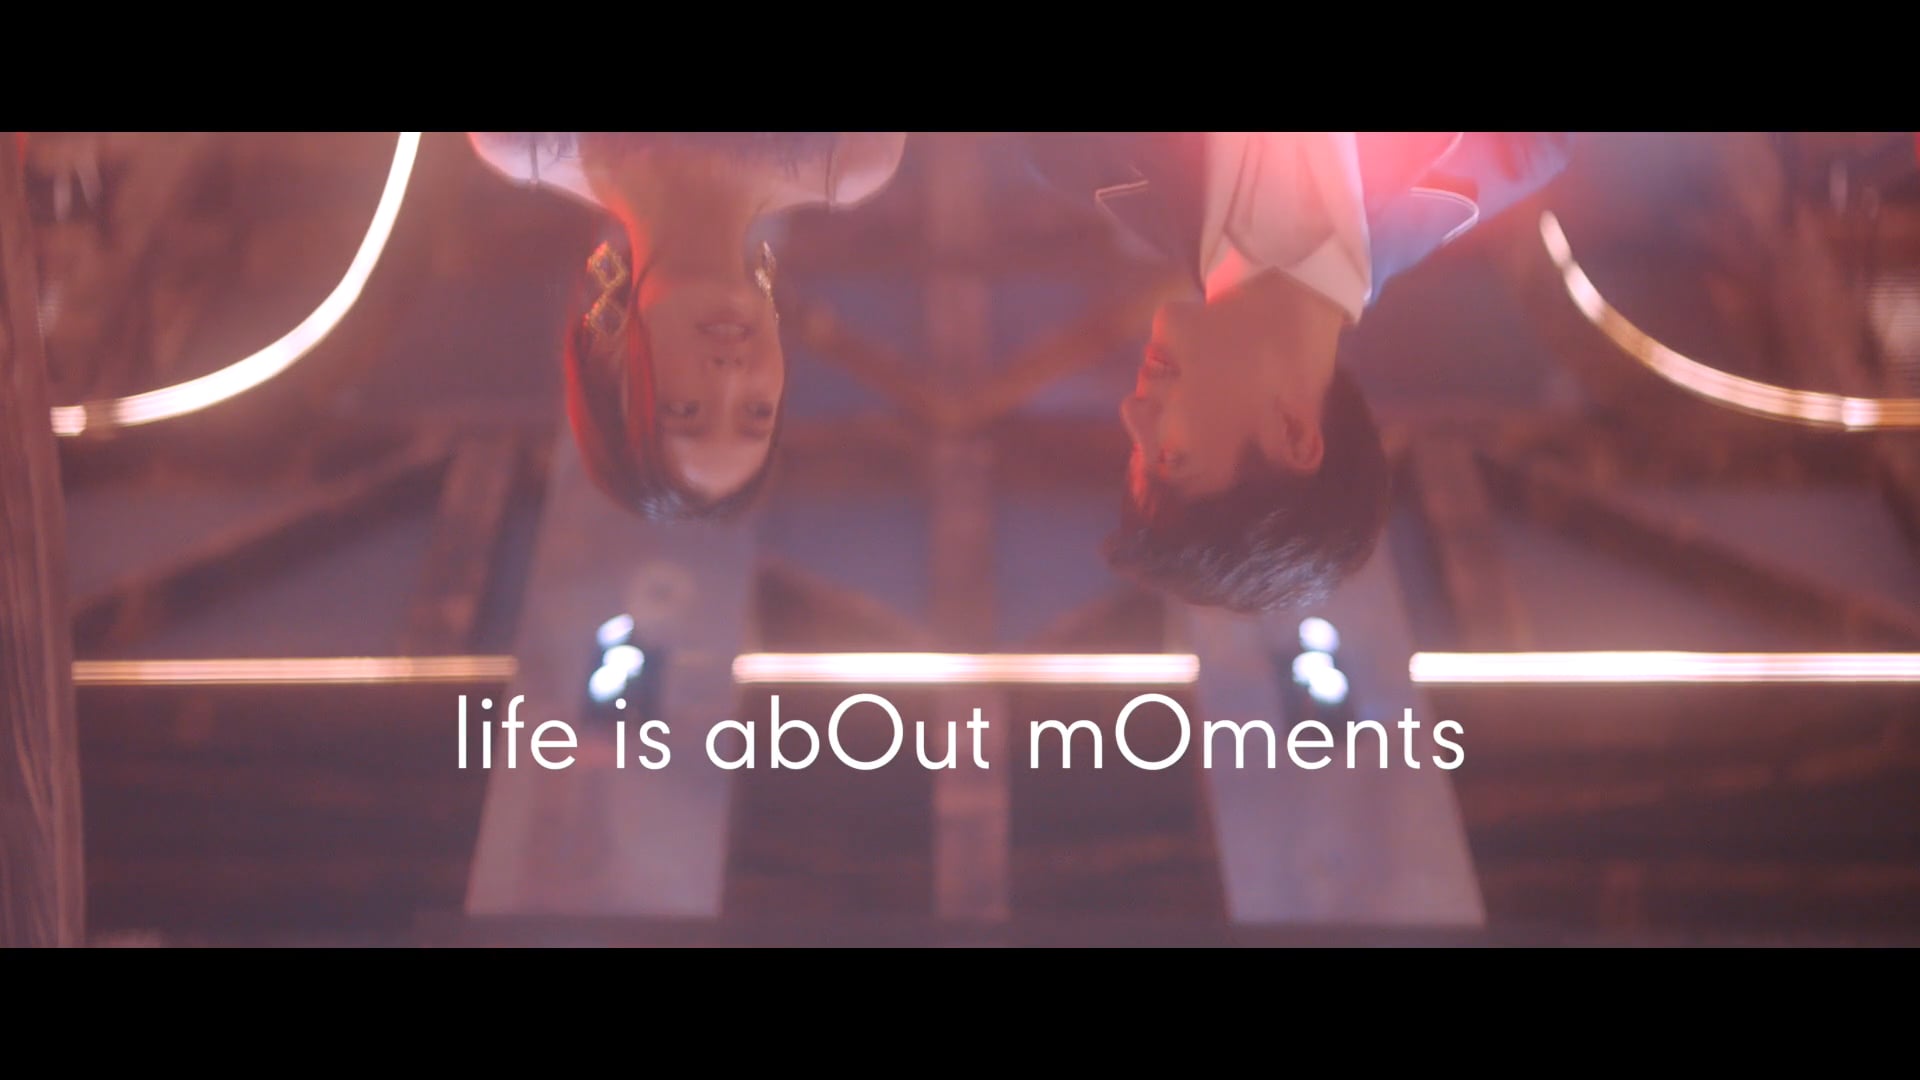 life is abOut mOments by Centralworld